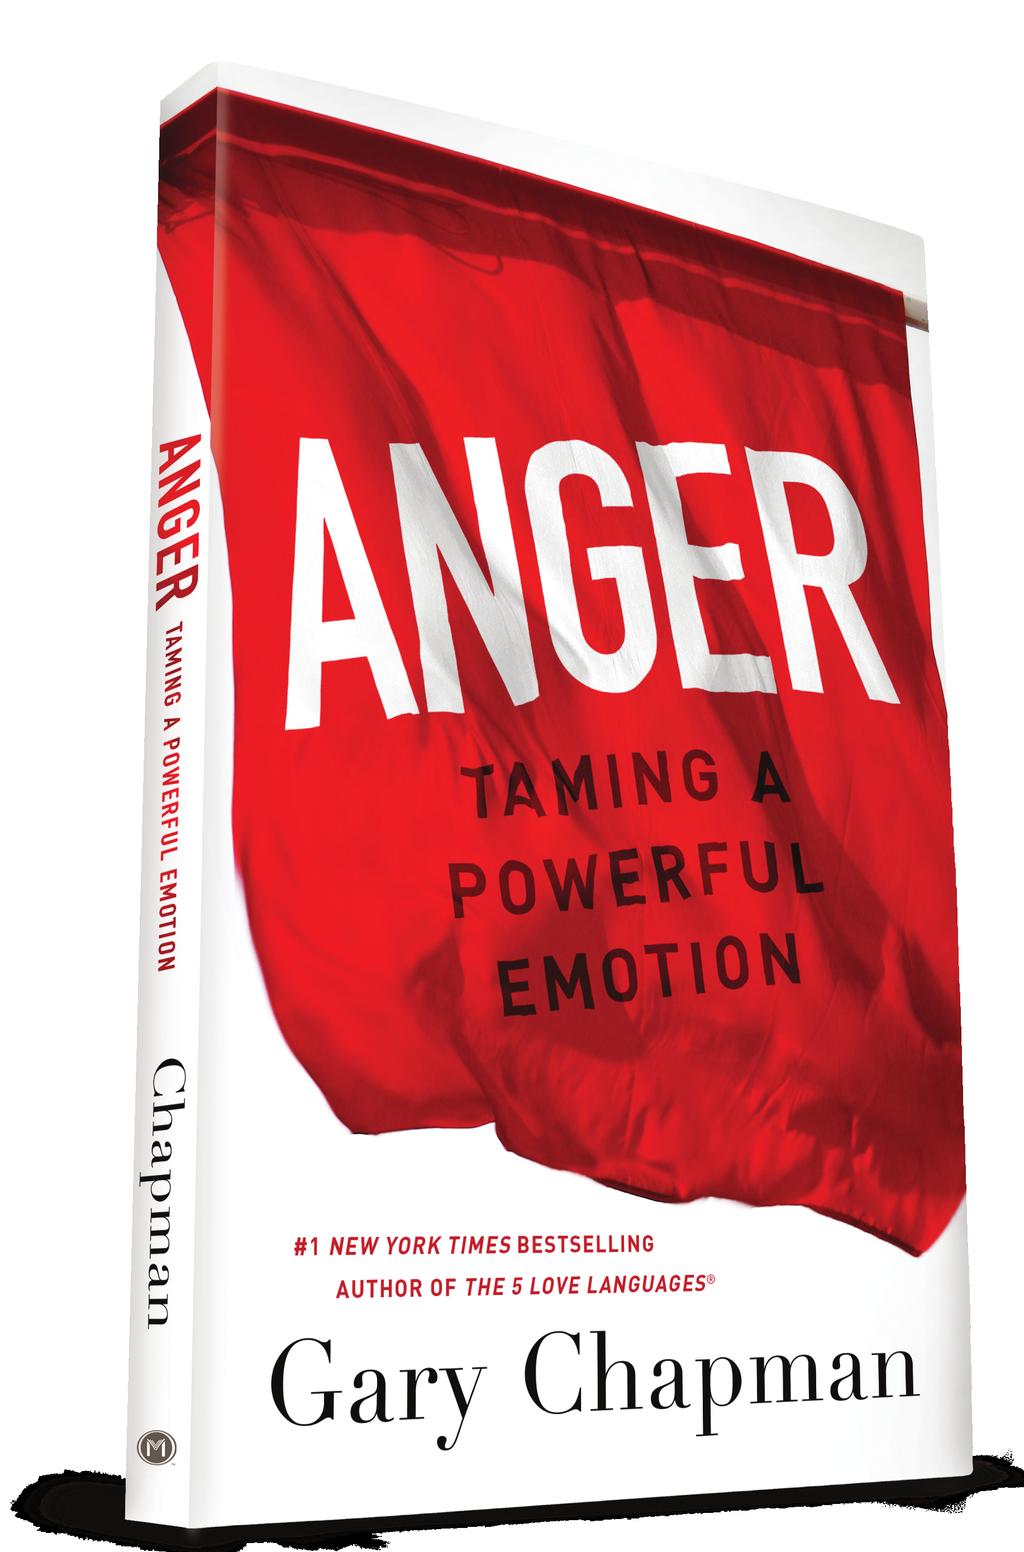 DISCUSSION GUIDE For more information about Anger: Taming a Powerful Emotion by Gary Chapman or to take the Personal Anger Assessment,visit www.5lovelanguages.com/anger.